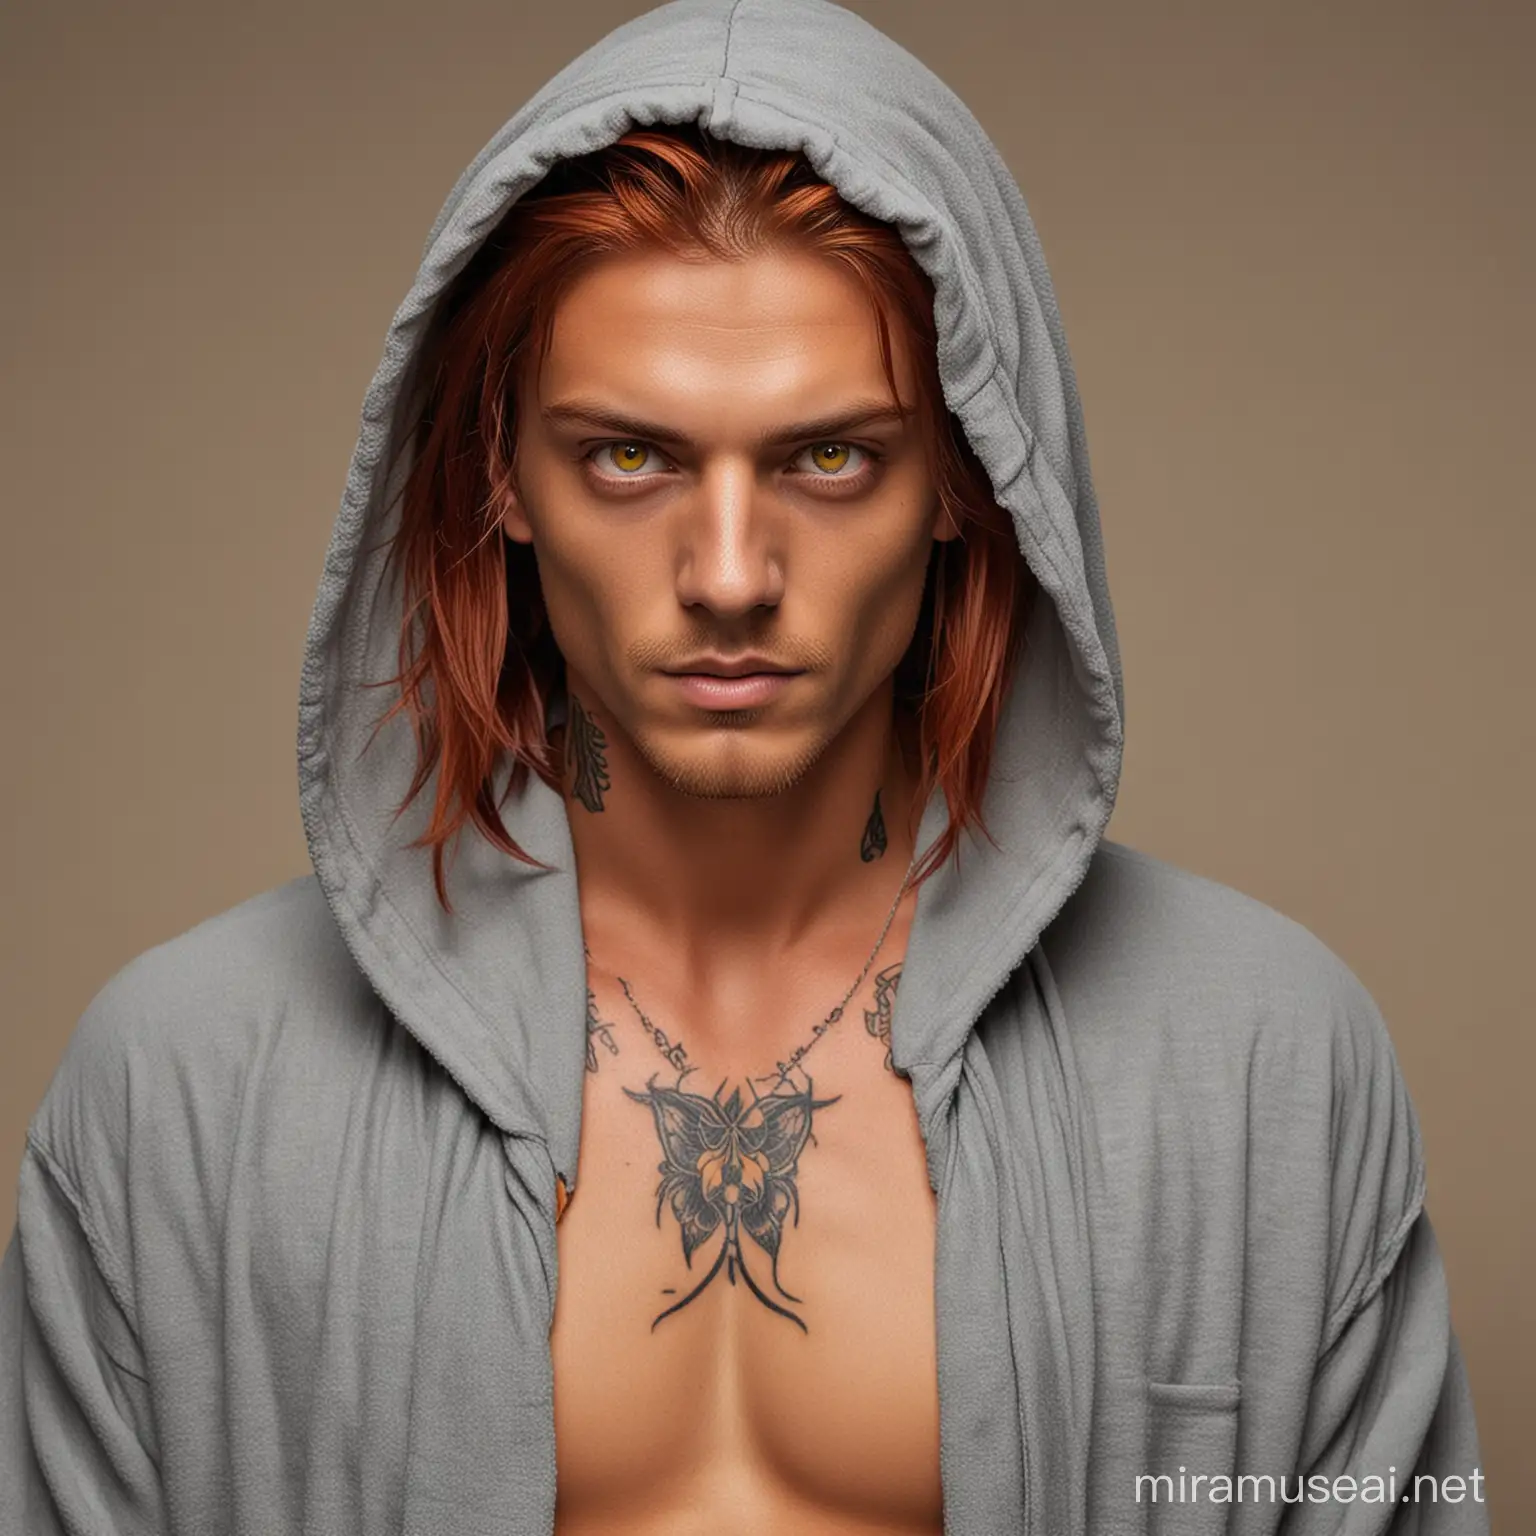 ]tanned skin. tying mid length red hair. yellow eyes. wearing a grey robe. his tattoo cover half of his face